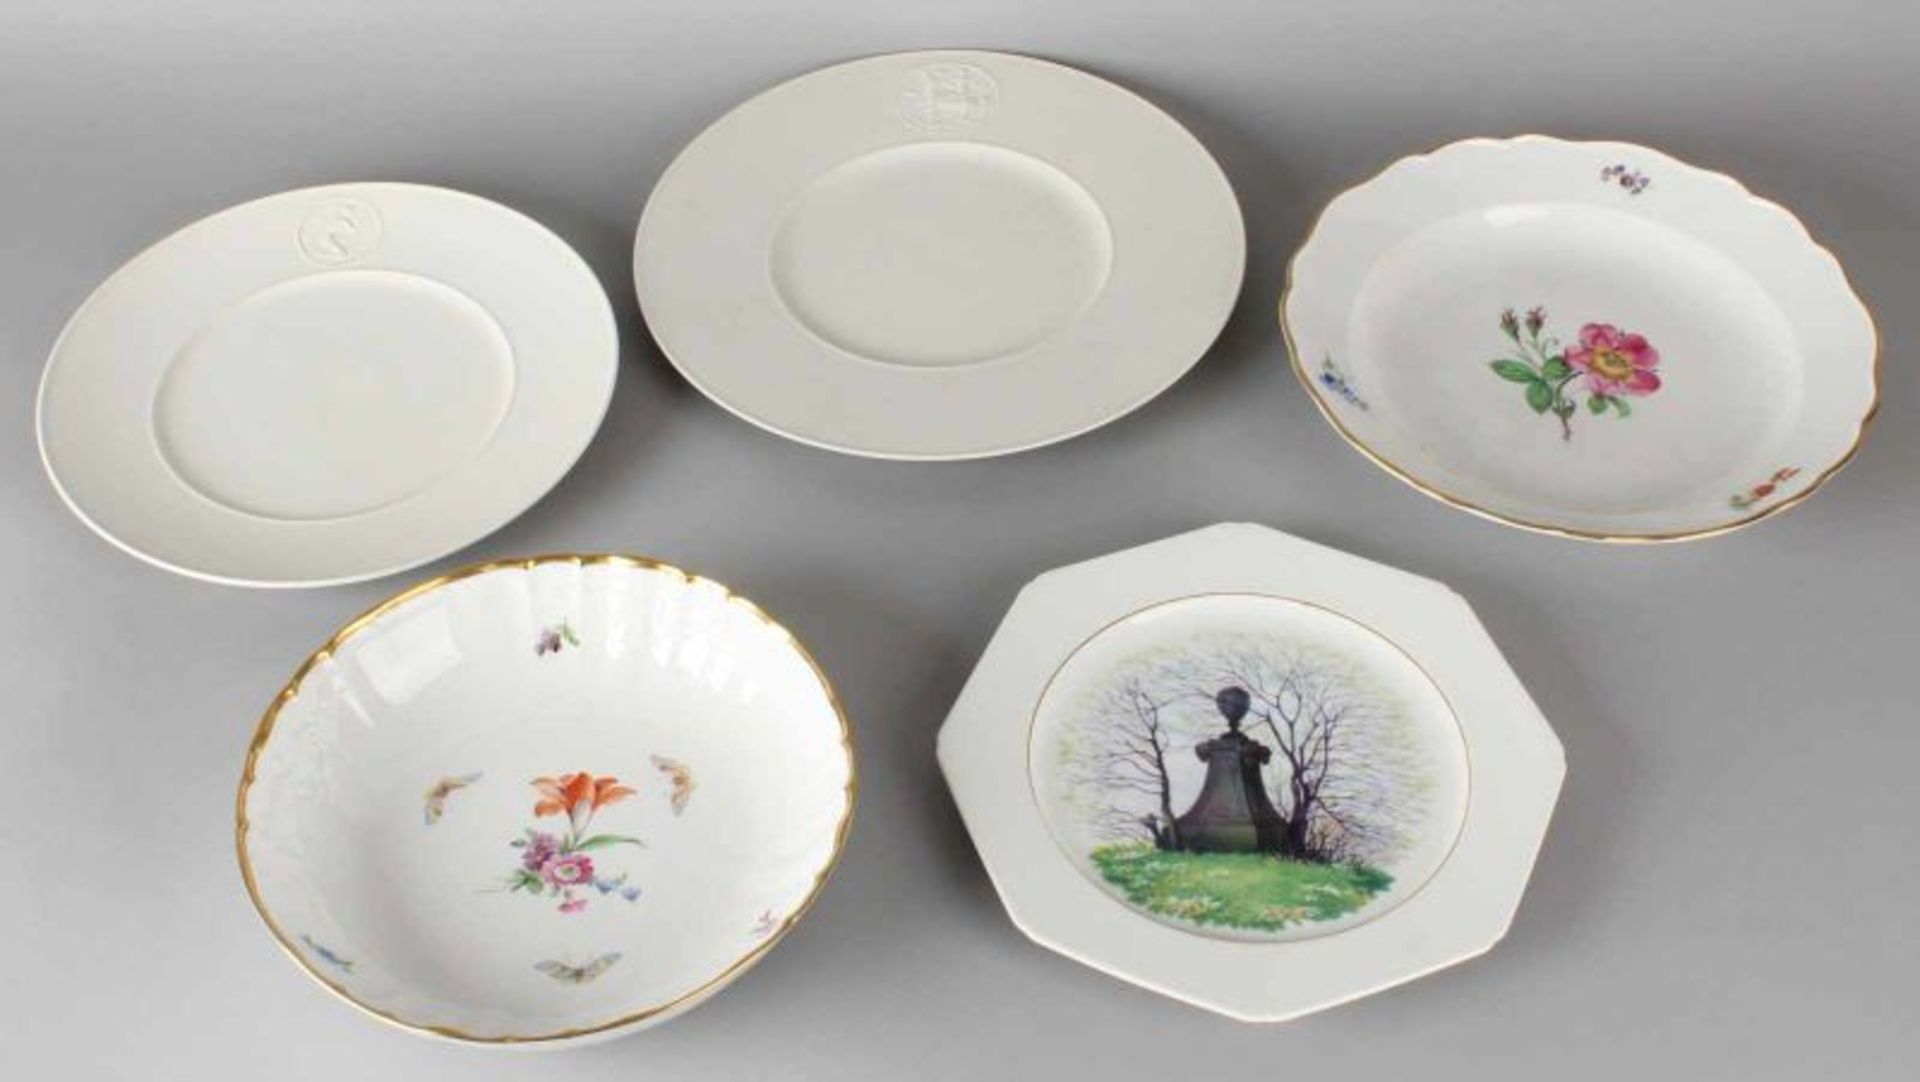 Five old / antique German porcelain plates Meissen and KPM First half 20th century. Including: